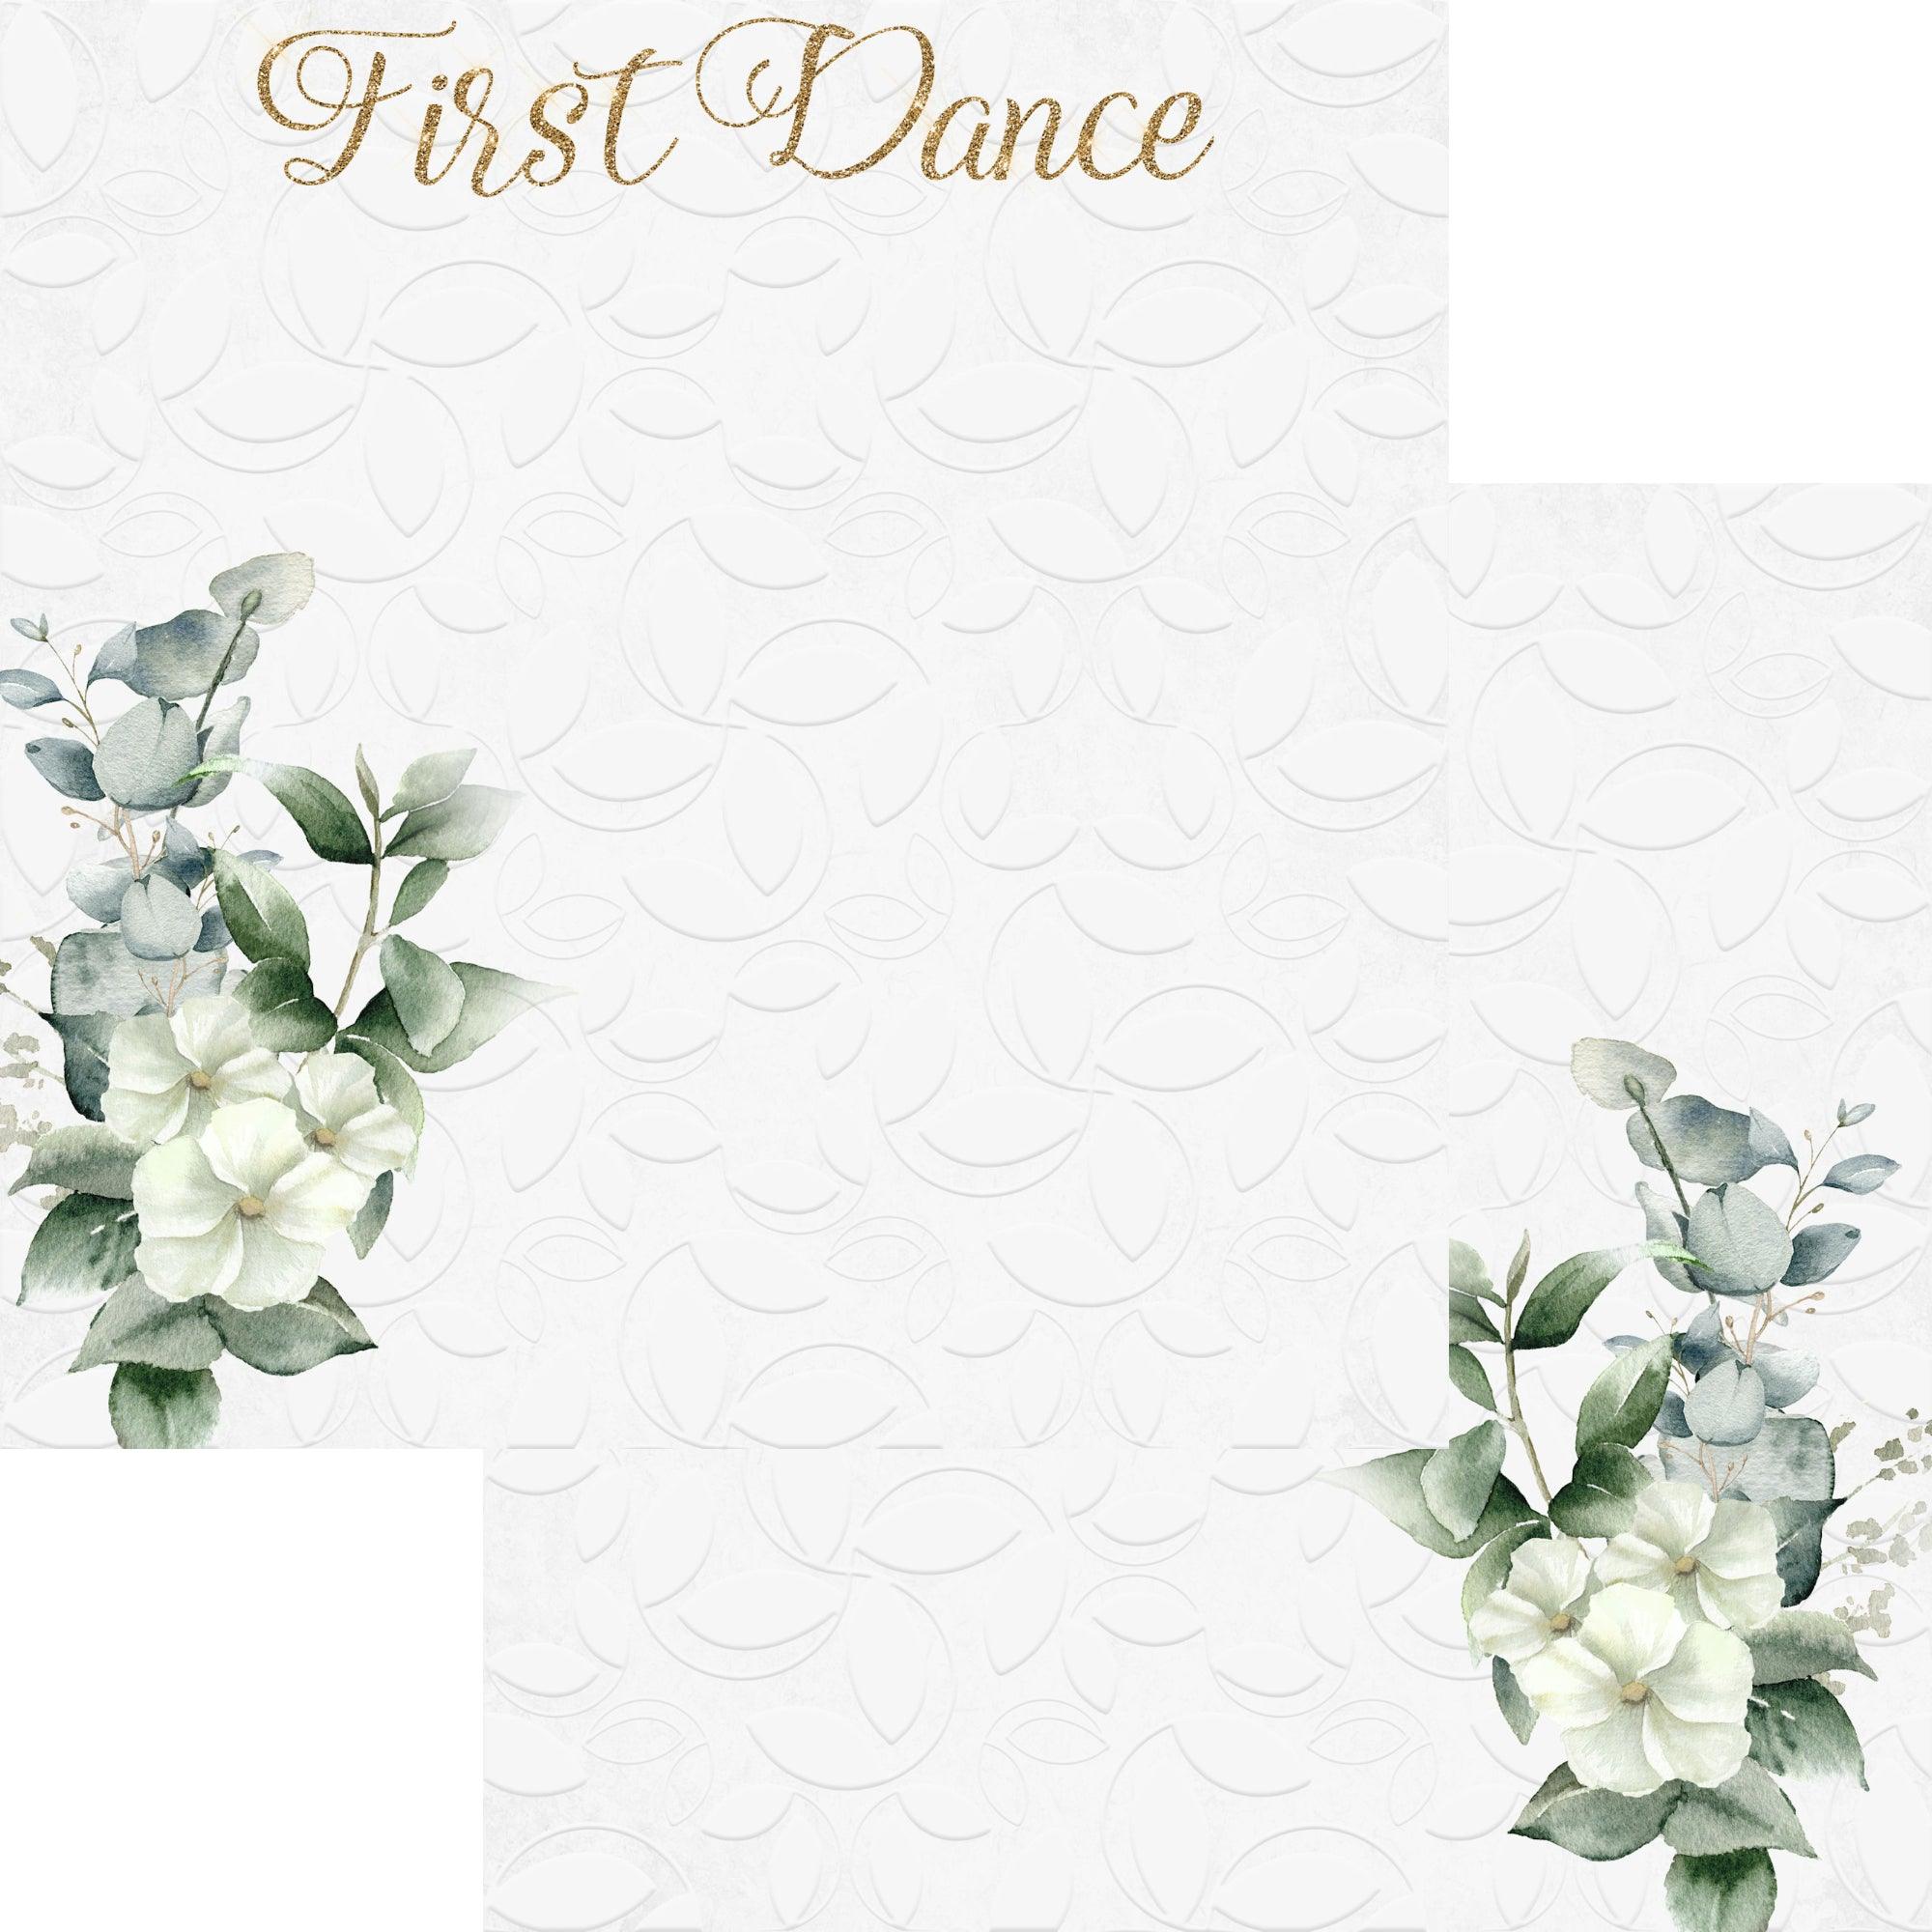 Love Always Collection First Dance 12 x 12 Double-Sided Scrapbook Paper by SSC Designs - Scrapbook Supply Companies